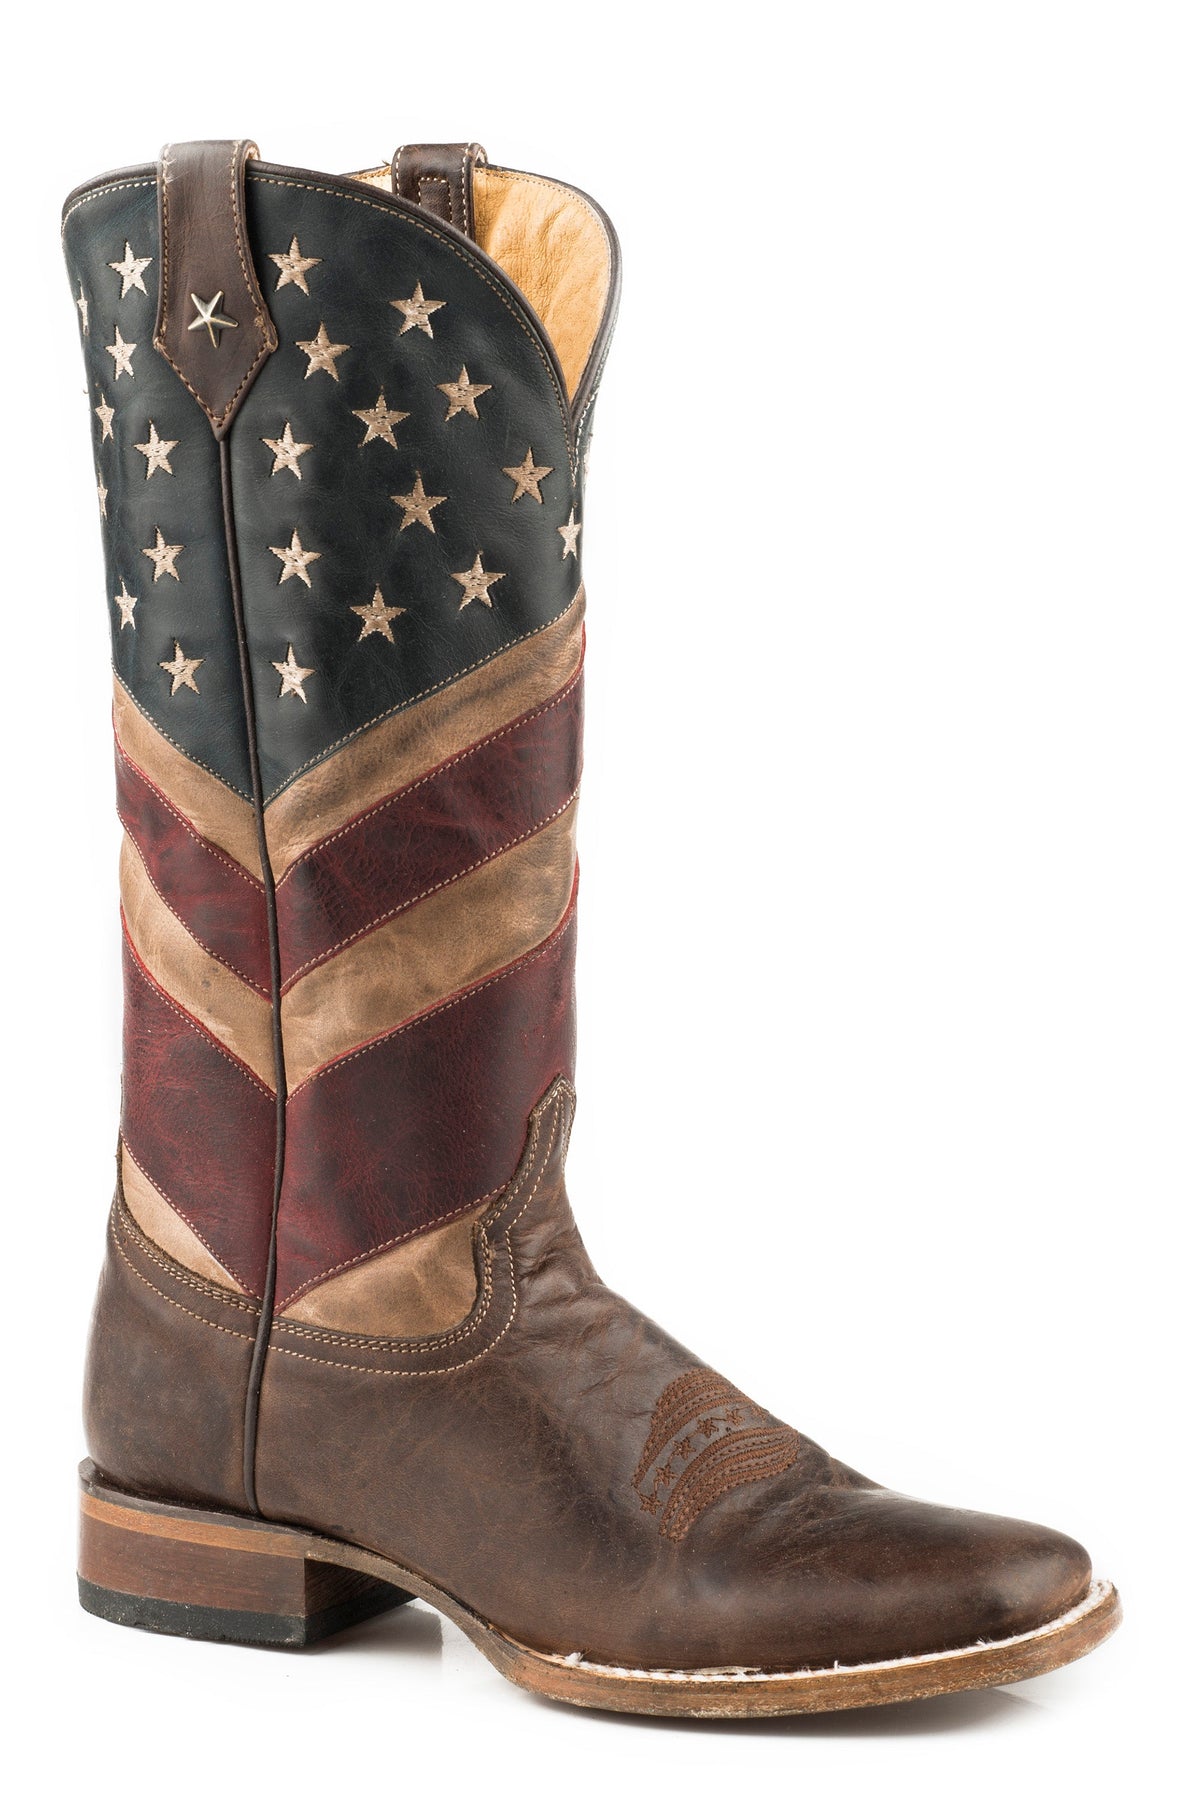 Roper Womens American Flag Leather Cowboy Boot Burnished Tan Red White And Blue